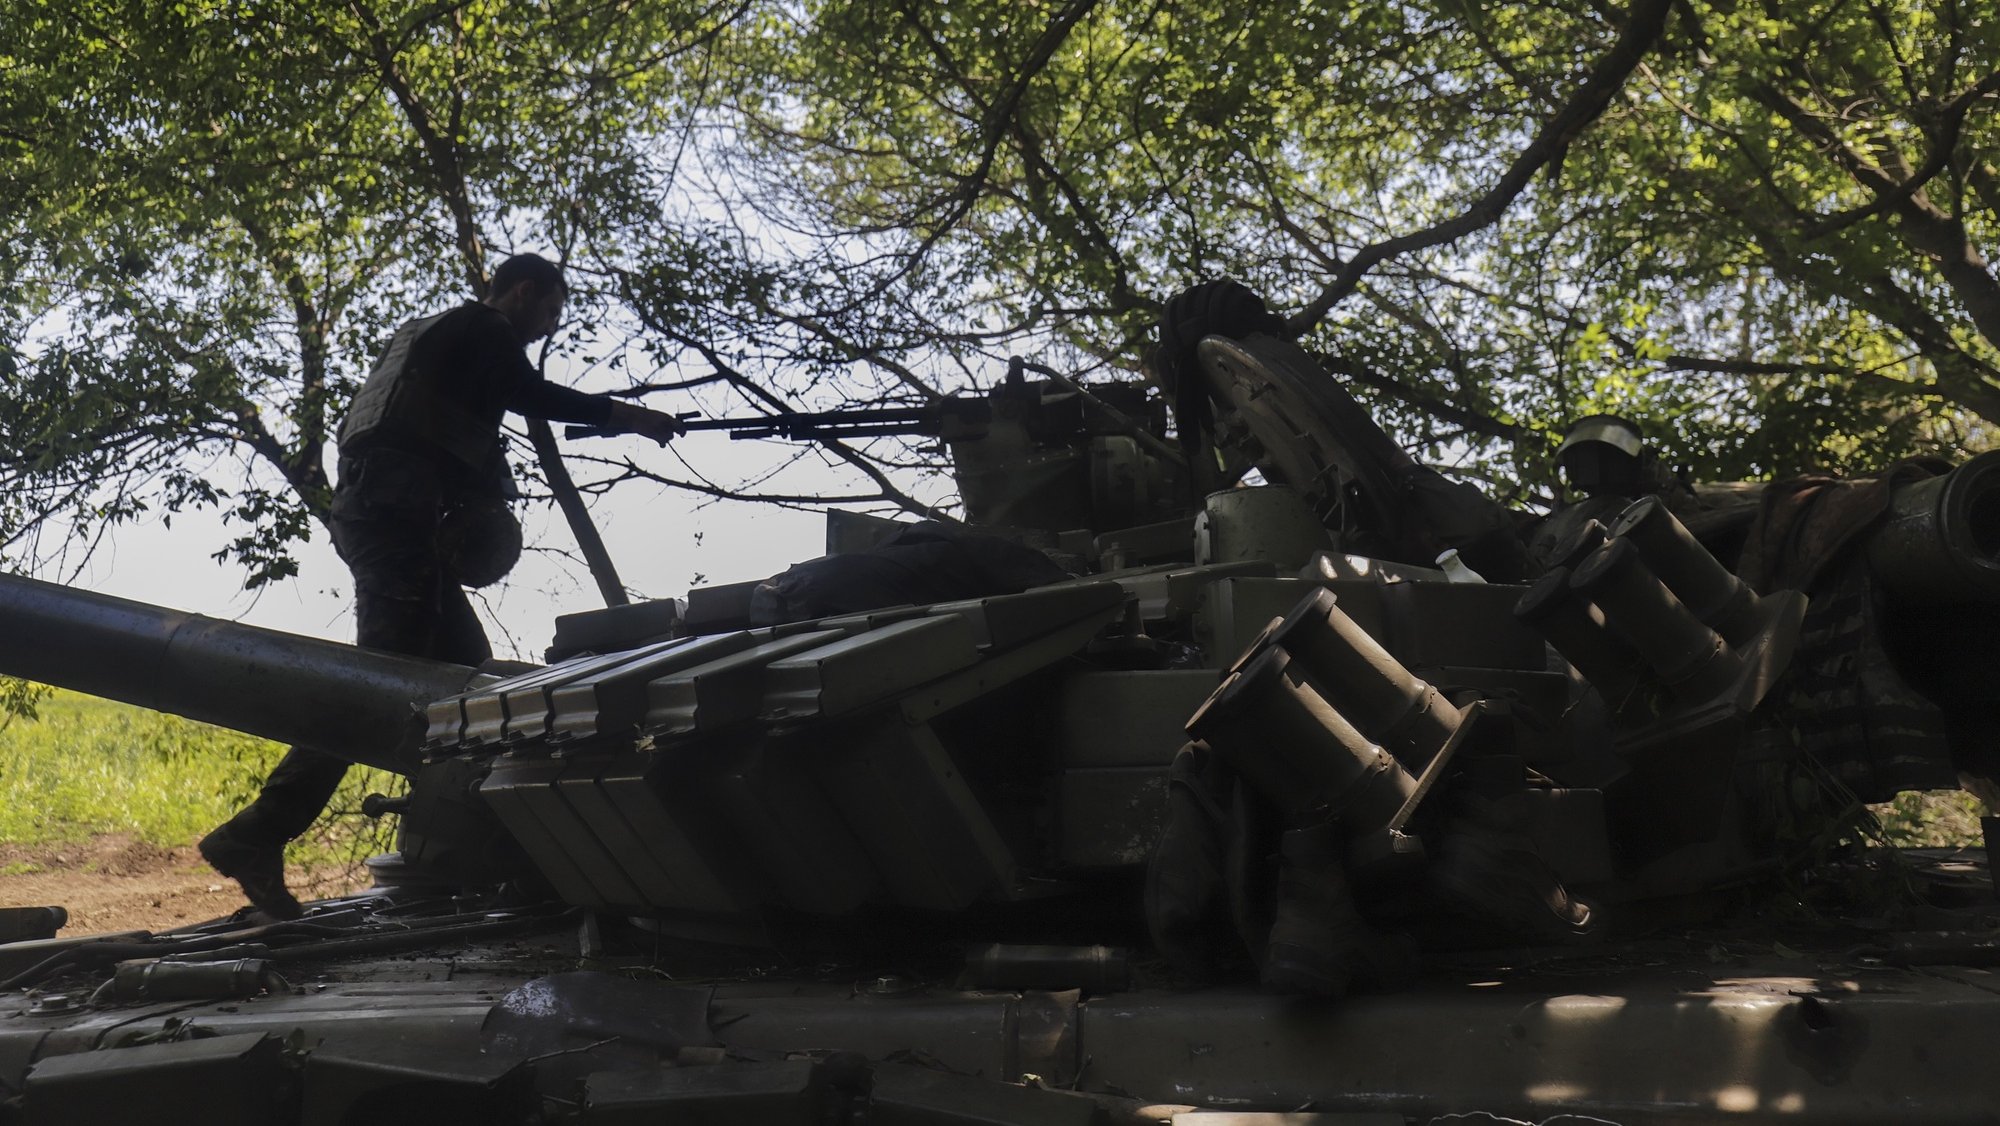 epa10008305 Ukrainian servicemen equip a tank close to a front line near the small city of Svitlodarsk of Donetsk area, 11 June 2022, amid heavy battles in that region in the last days. On 24 February Russian troops entered Ukrainian territory starting a conflict that has provoked destruction and a humanitarian crisis.  EPA/STR